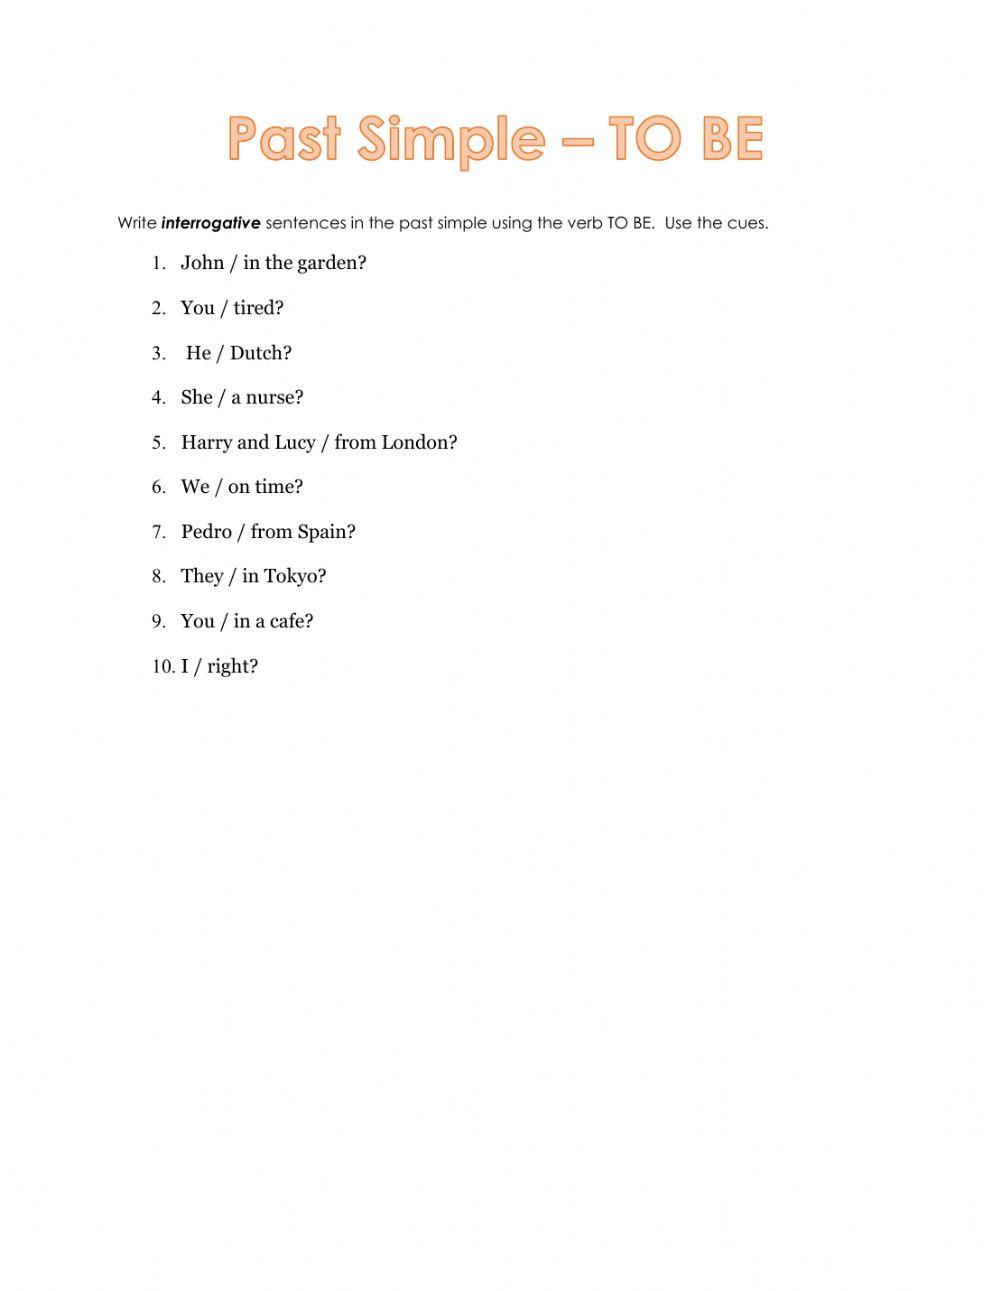 Past Simple TO BE - Interrogative (Yes-No questions)